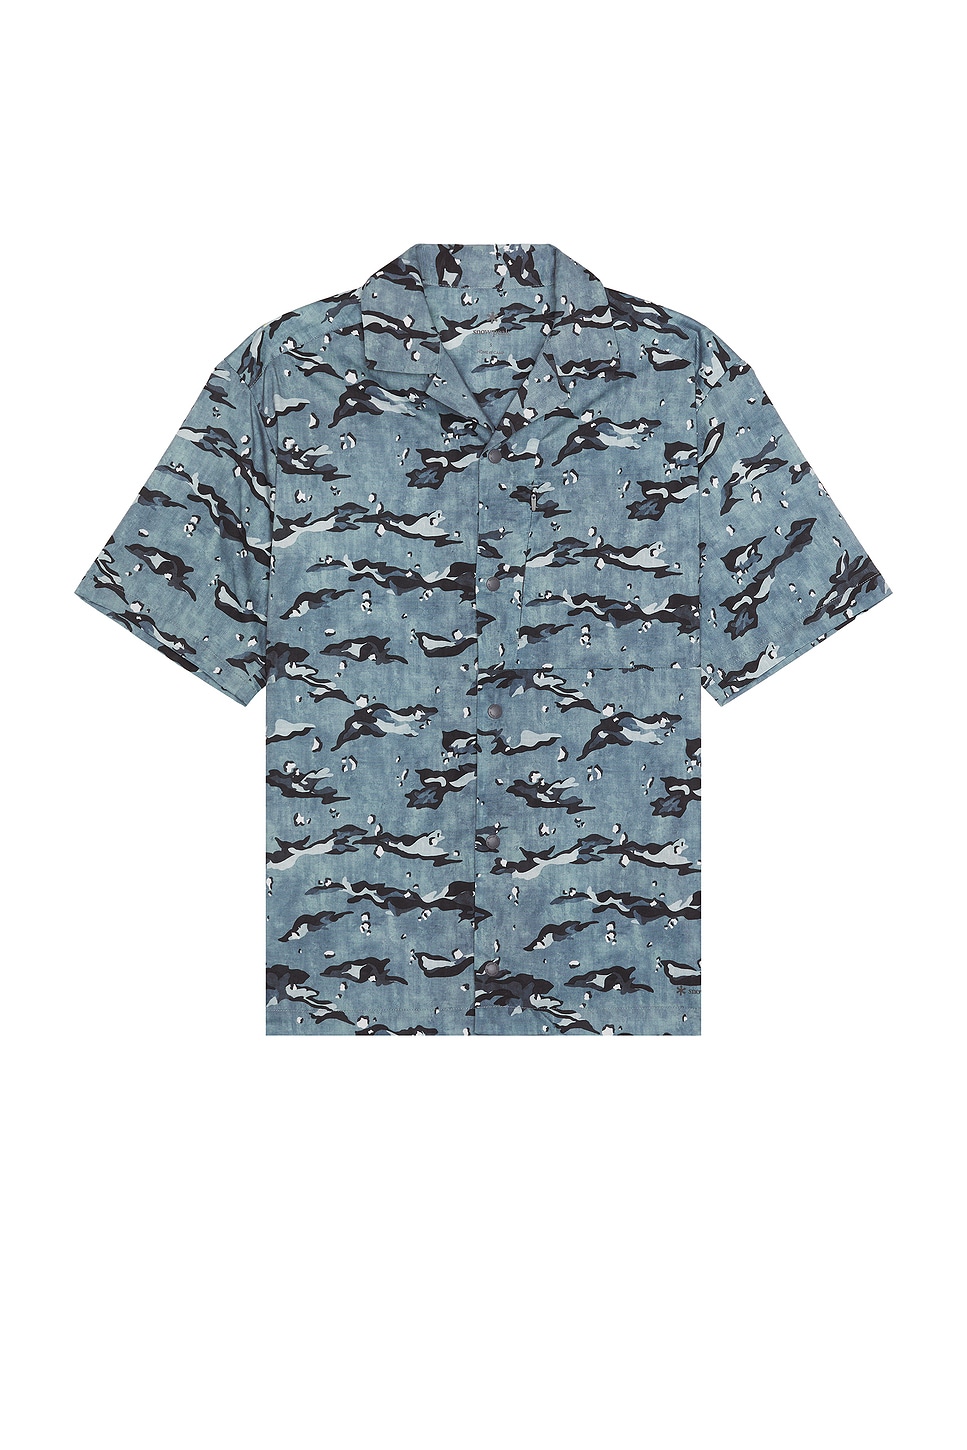 Image 1 of Snow Peak Printed Breathable Quick Dry Shirt in Grey